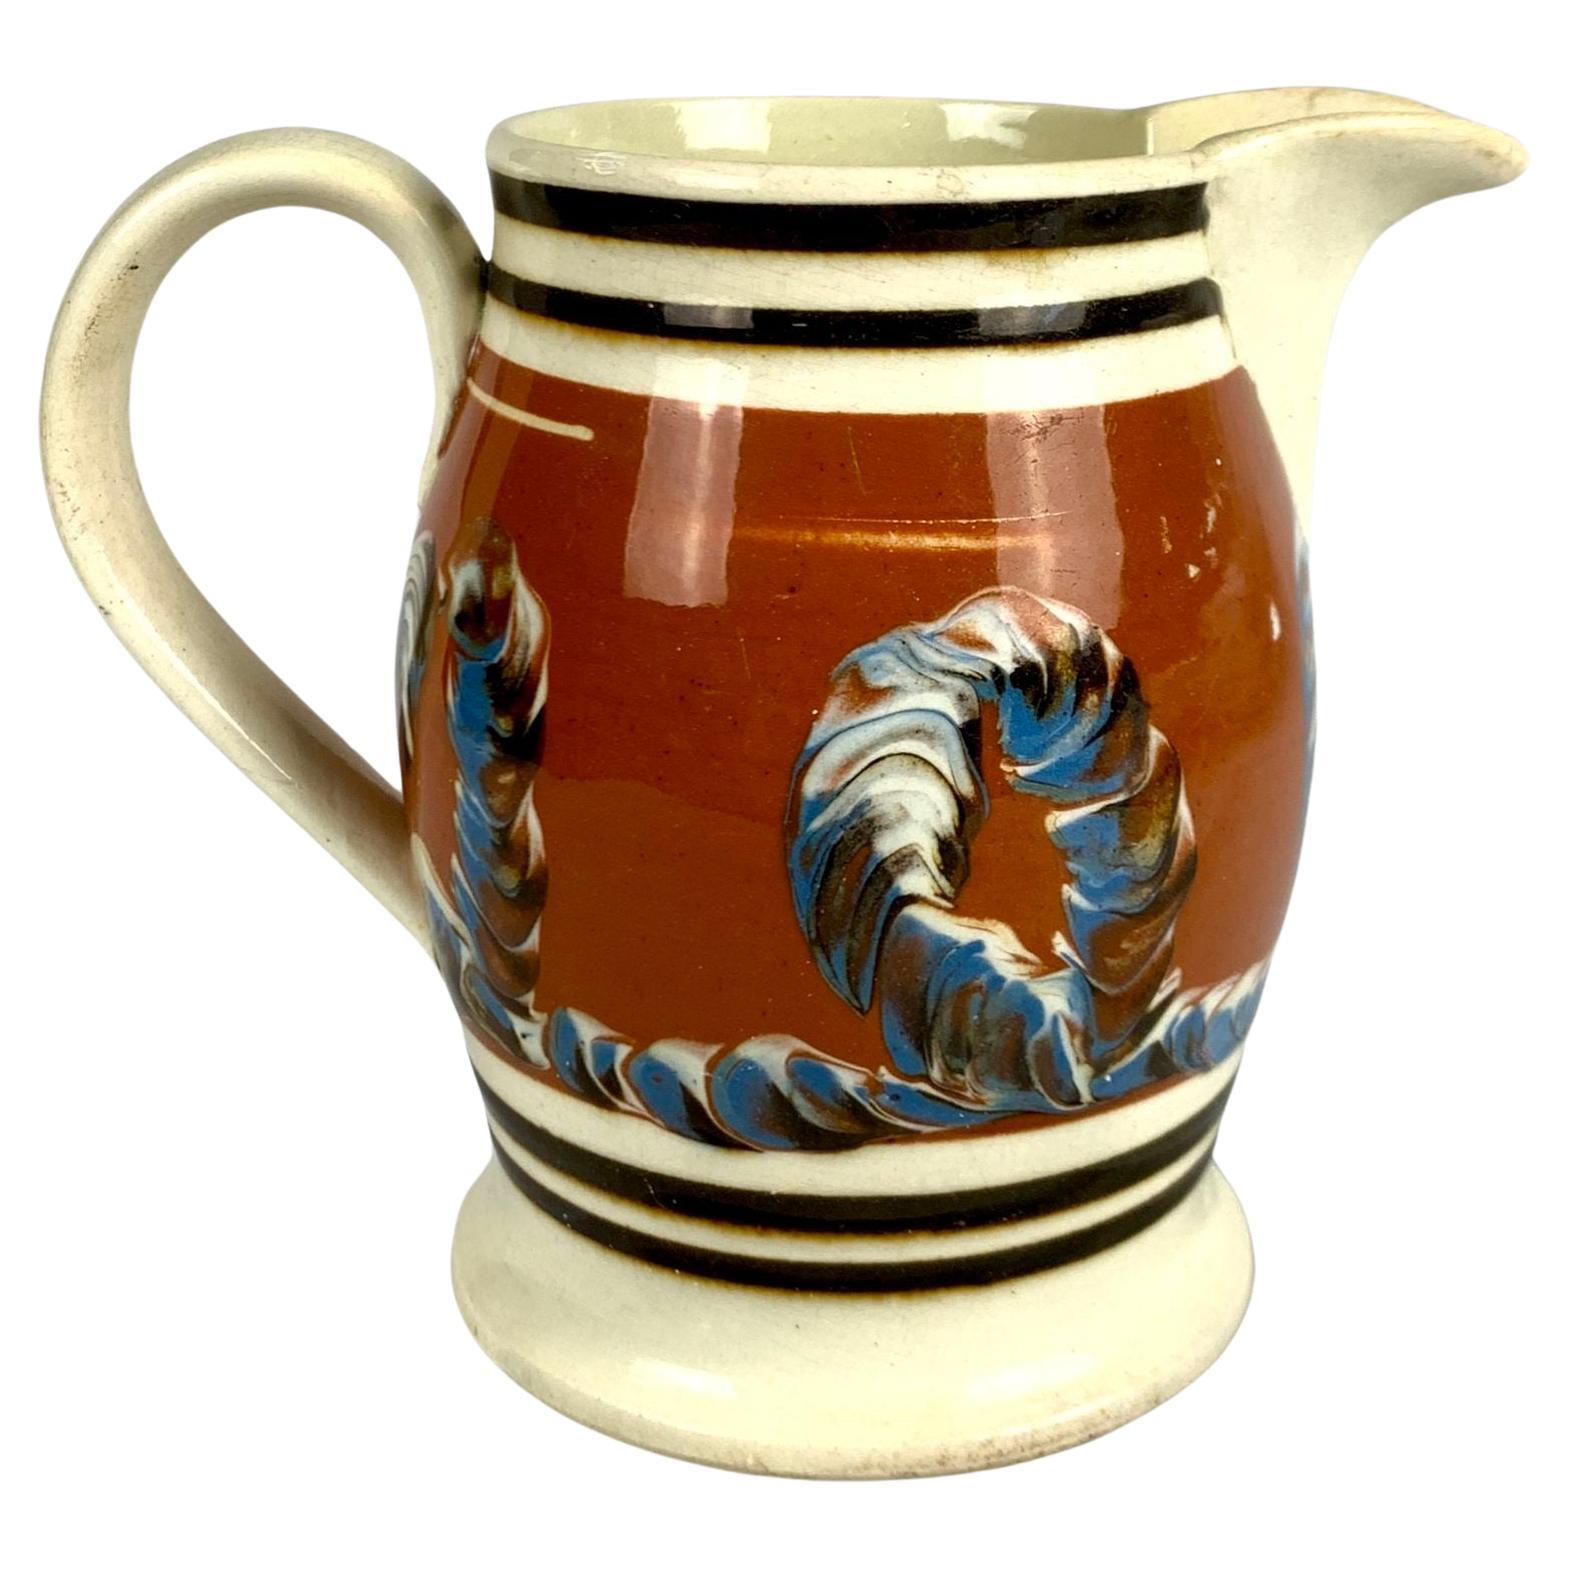 Early Mochaware Creamware Pitcher with Cable Decoration England Circa 1810